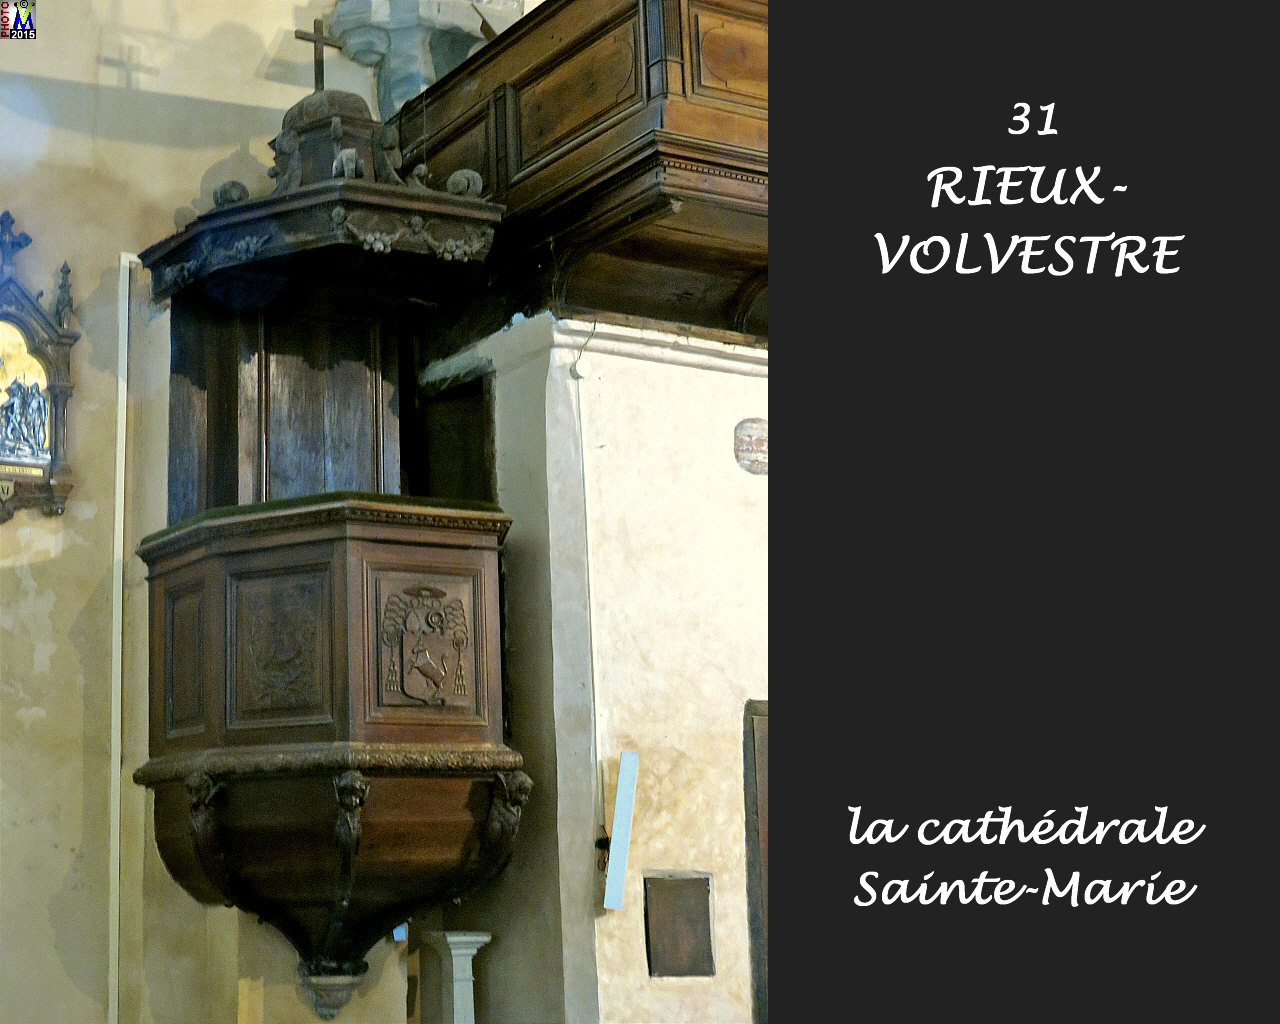 31RIEUX-VOLVESTRE_cathedrale_264.jpg